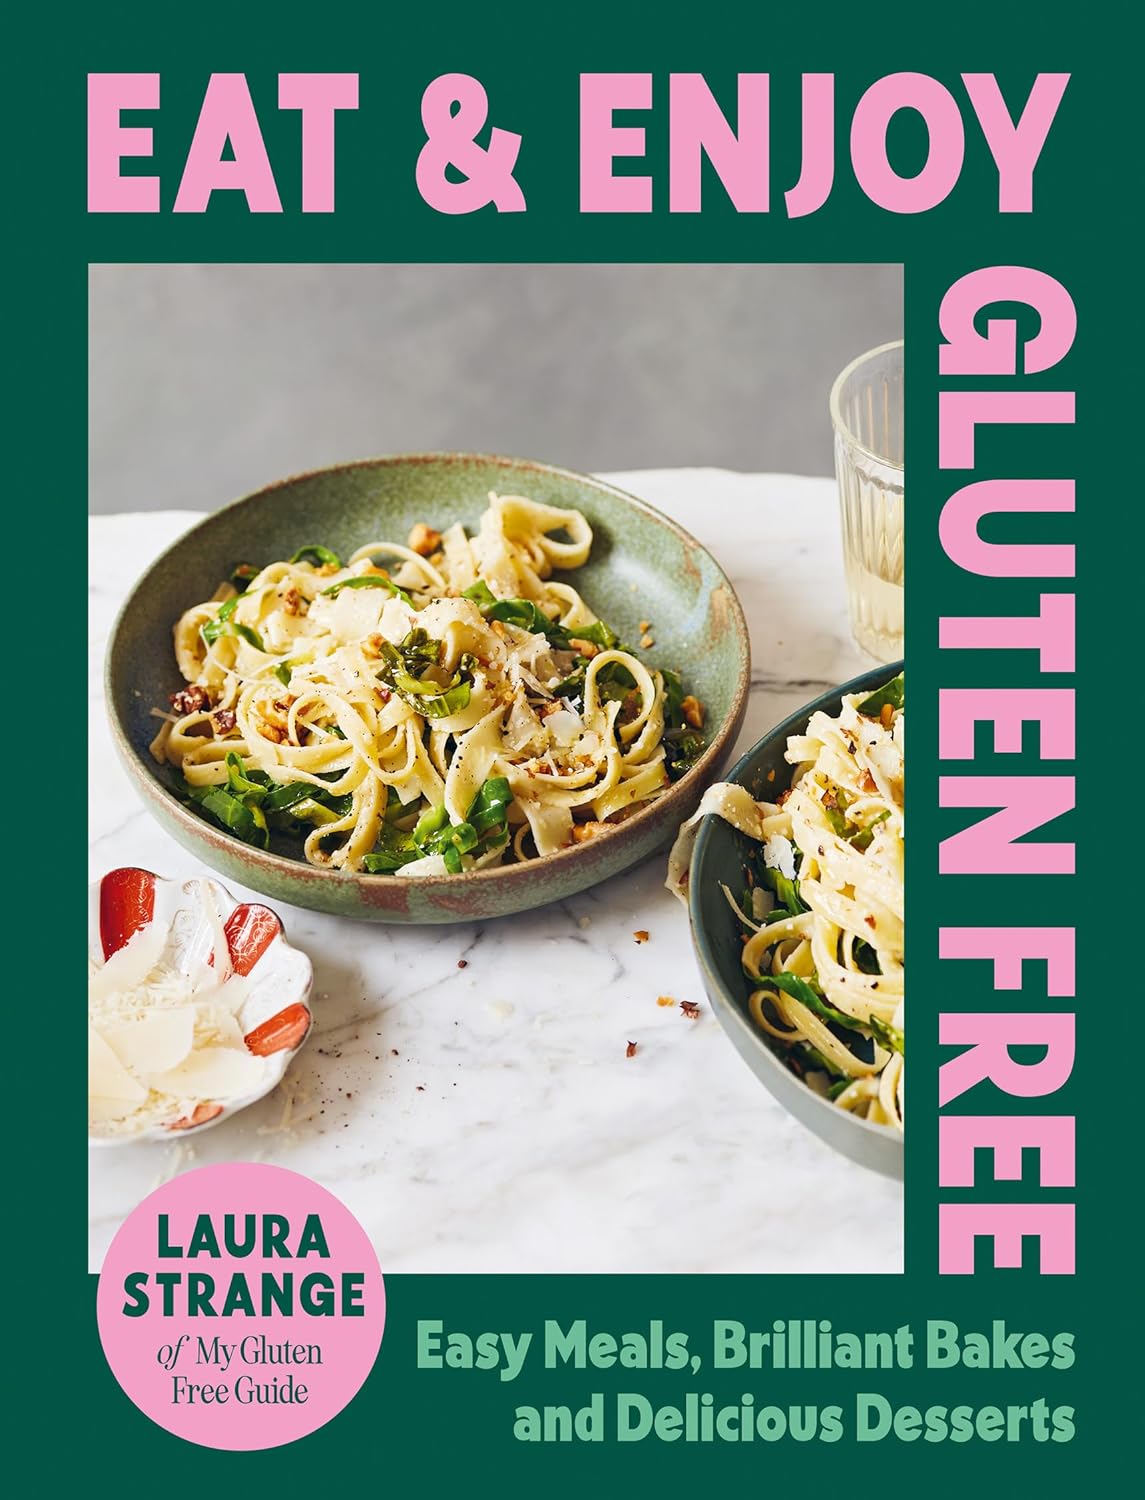 Eat and Enjoy Gluten Free: Easy Meals, Brilliant Bakes and Delicious Desserts (Laura Strange)